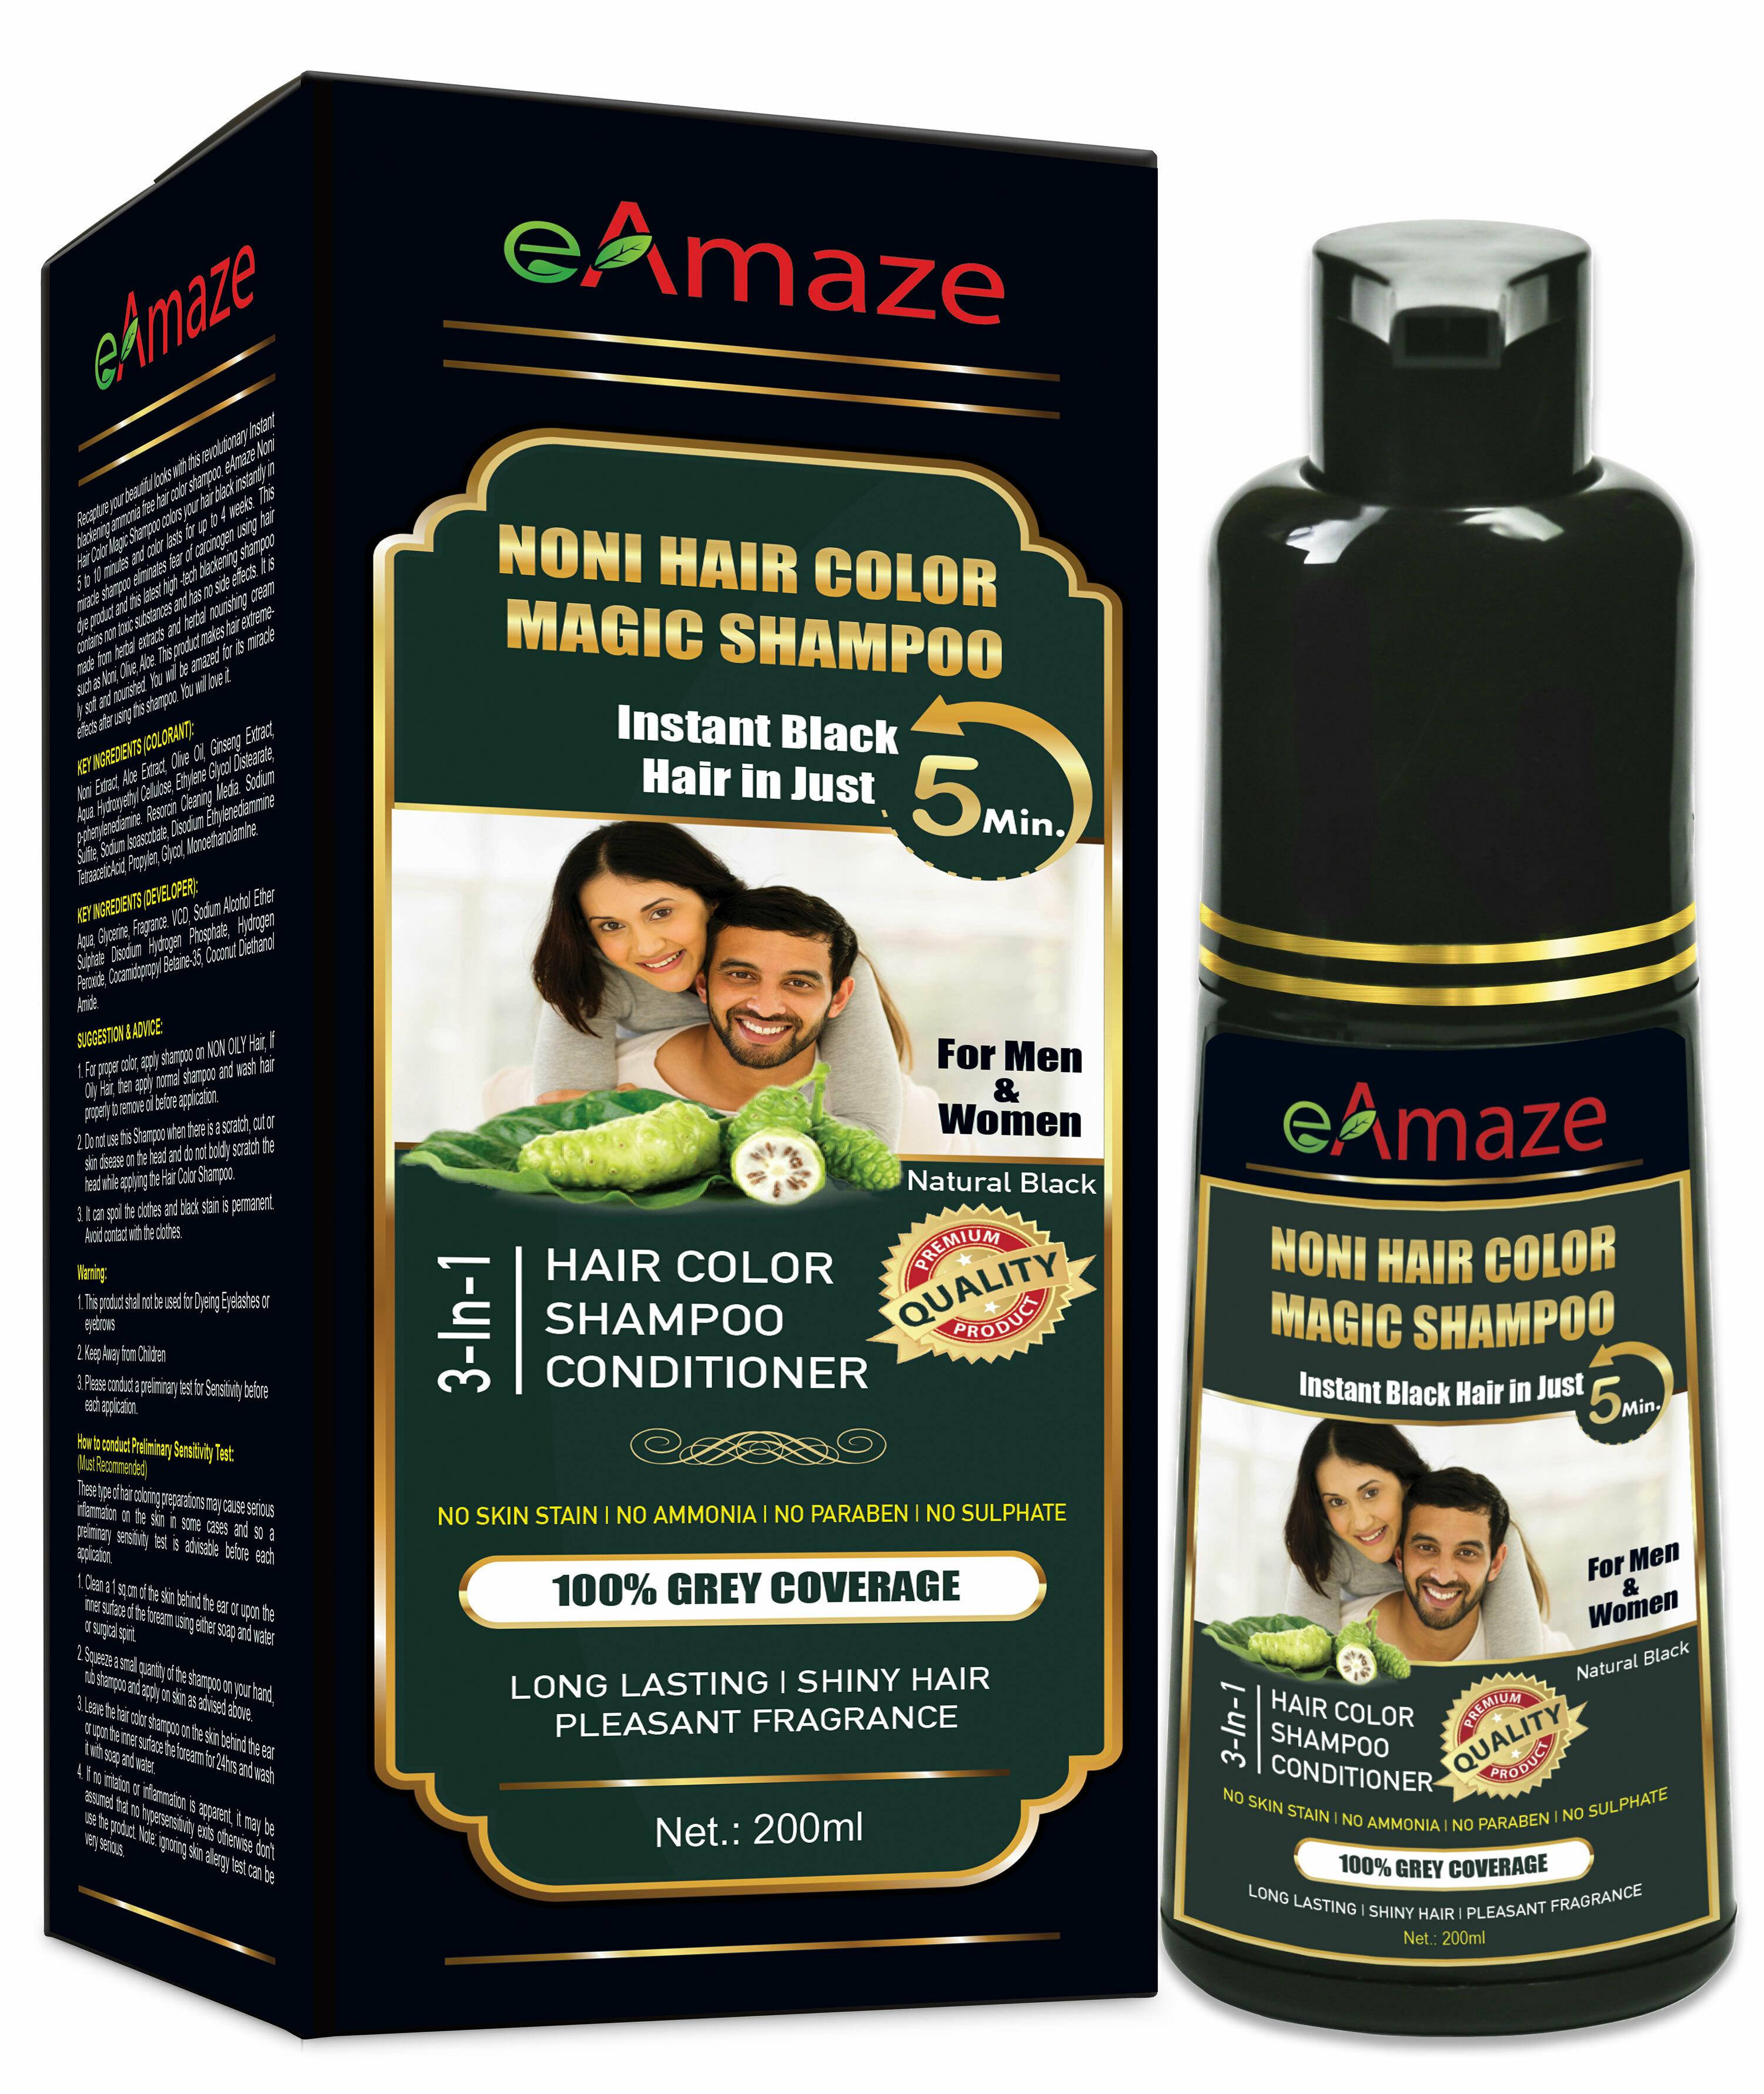 eAmaze Noni Hair Color Shampoo 200ml (Natural Black) Professional Hair  Color at Home | No Skin Stain, No Ammonia, No Paraben, No Sulphate |  Enriched with Noni Extract and Argan Extract - JioMart